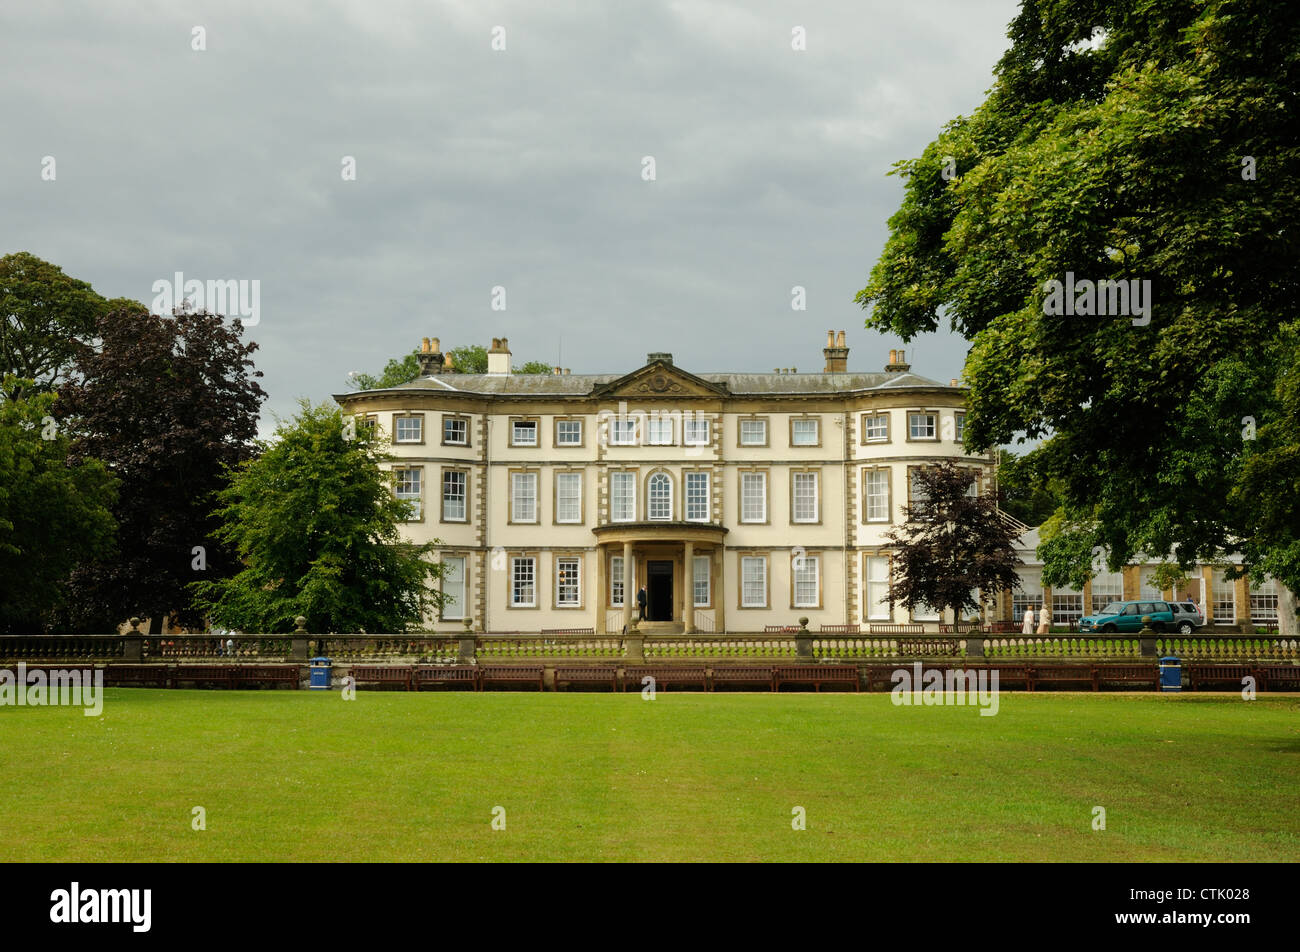 Sewerby Hall, East Yorkshire, England Stockfoto